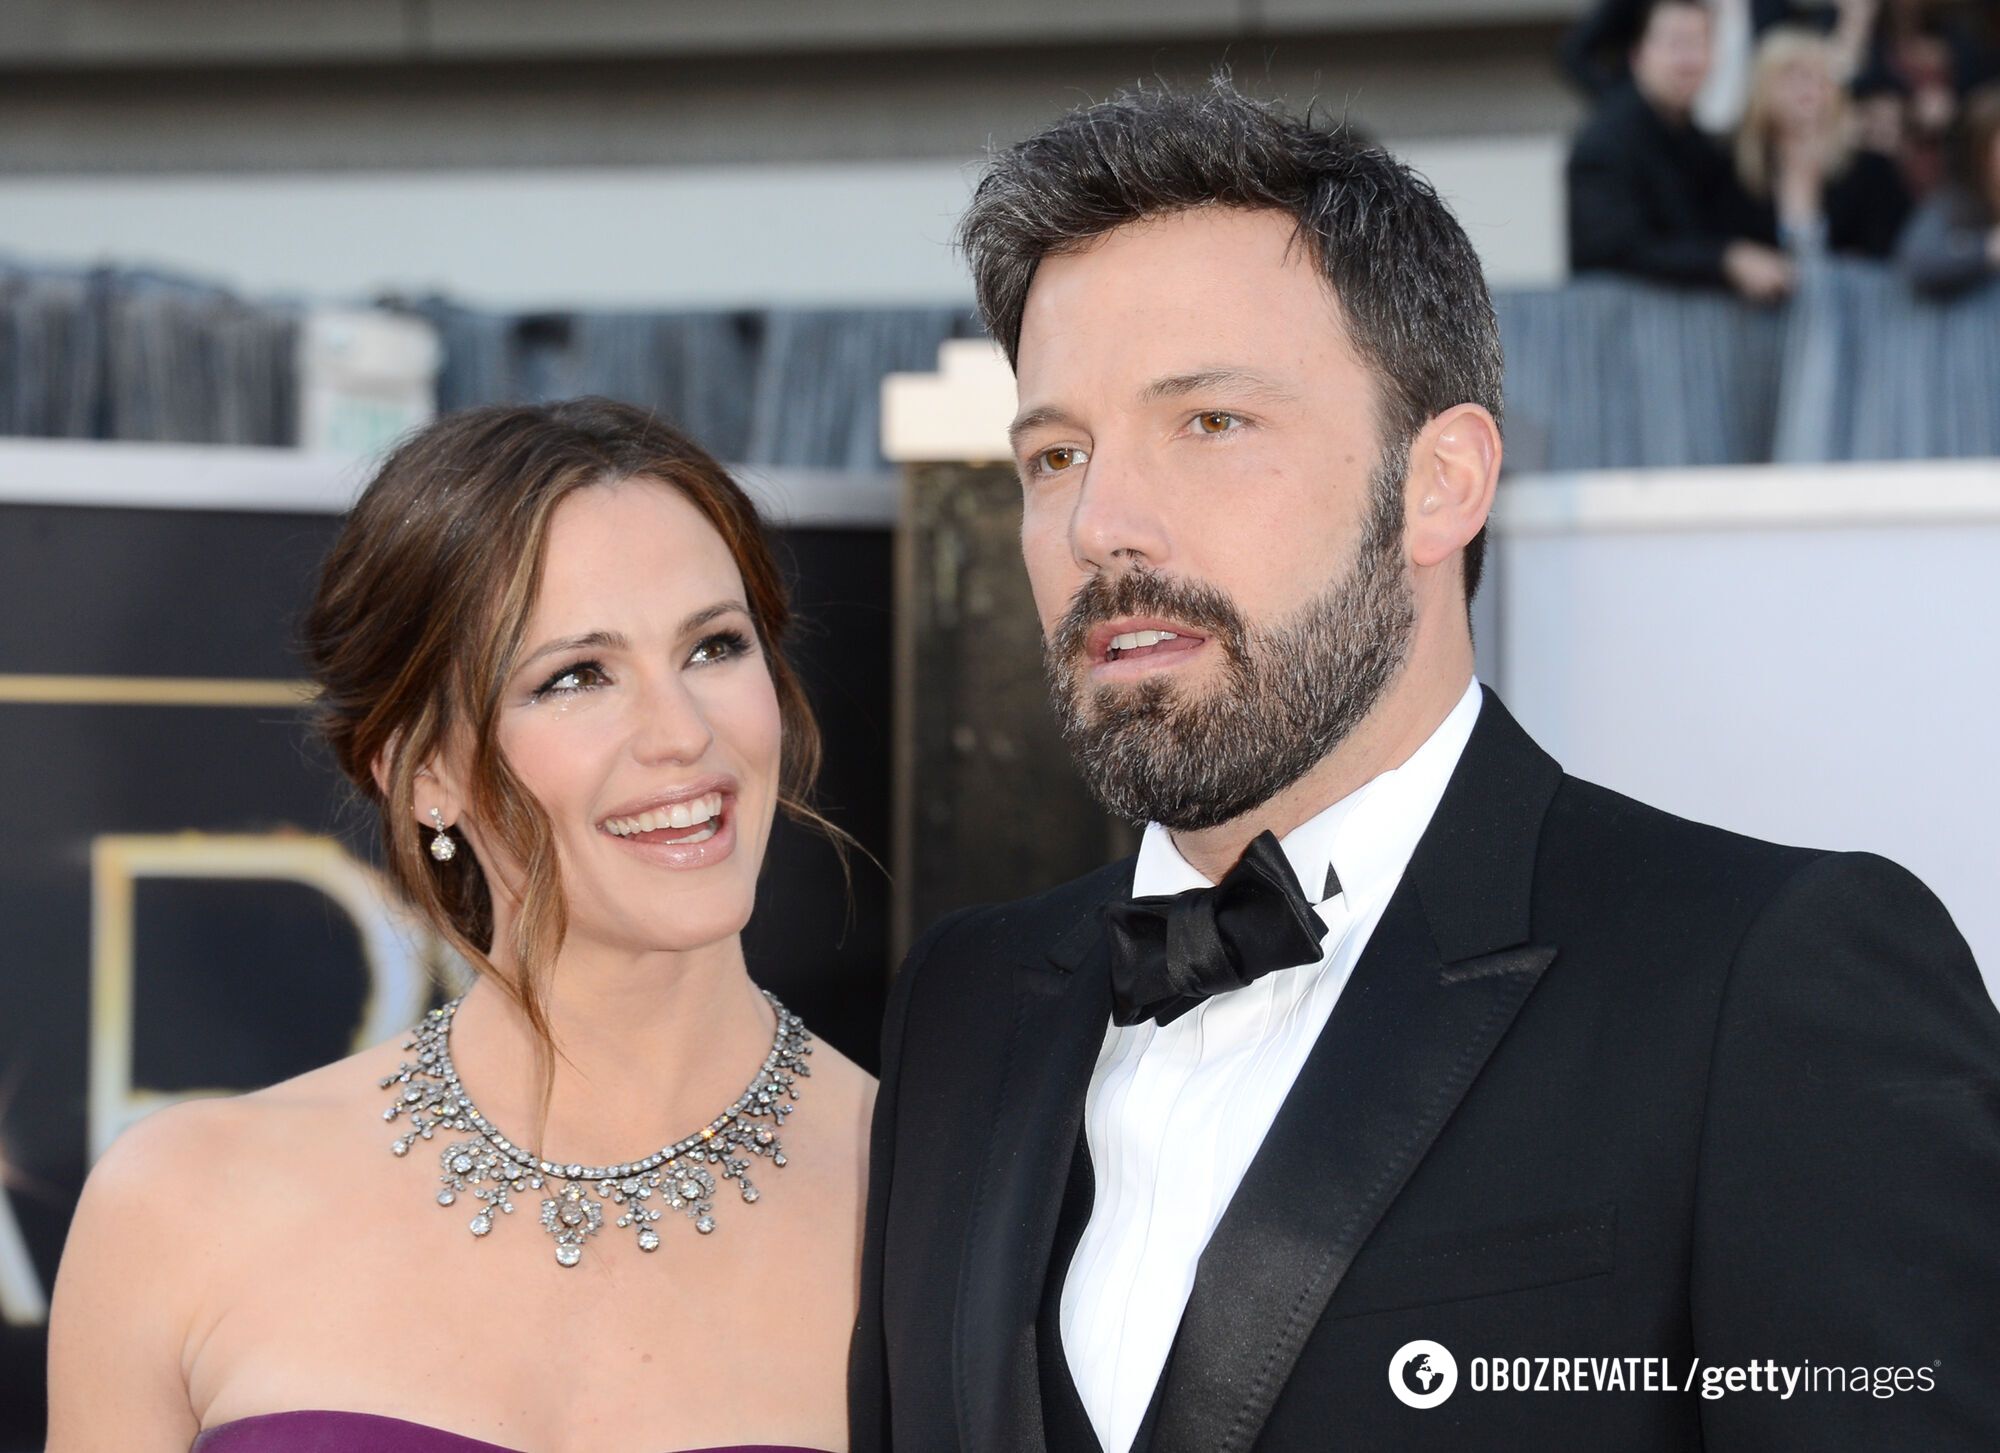 Ben Affleck's ex-wife Jennifer Garner is getting married: who the actress is secretly engaged to